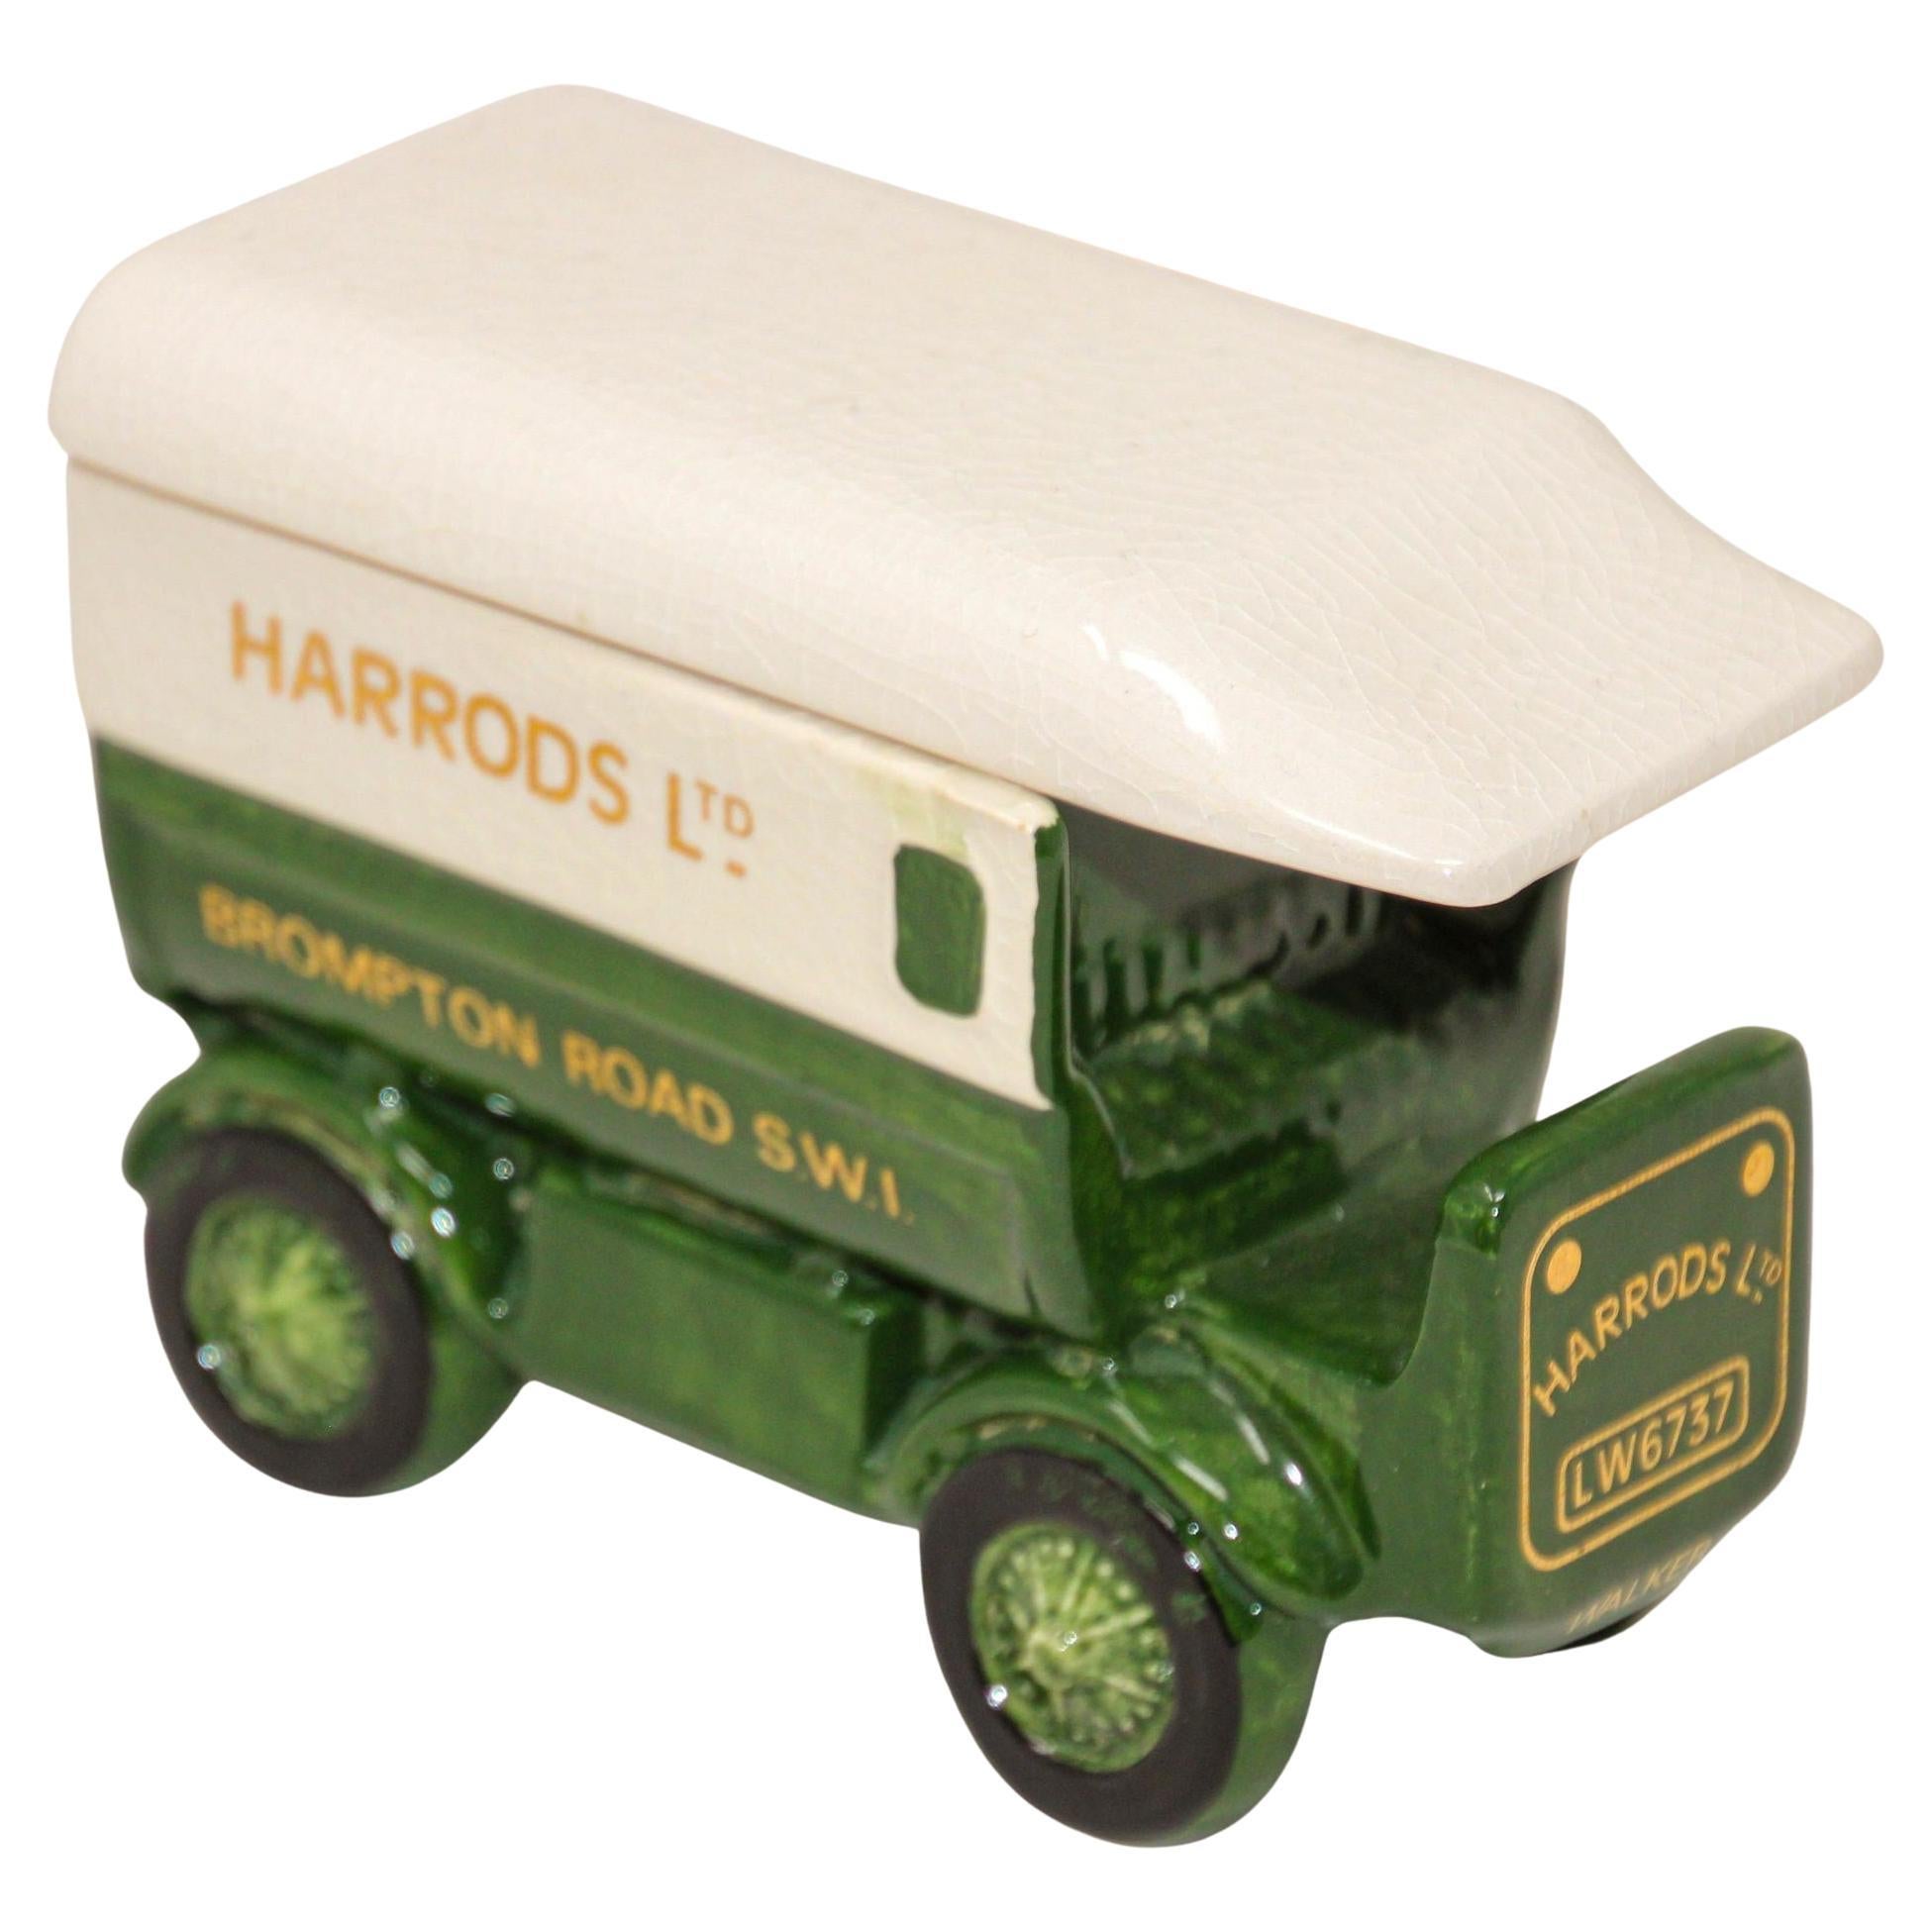 Harrods Porcelain Delivery Truck Lidded Tea Caddy Box London Pottery England For Sale